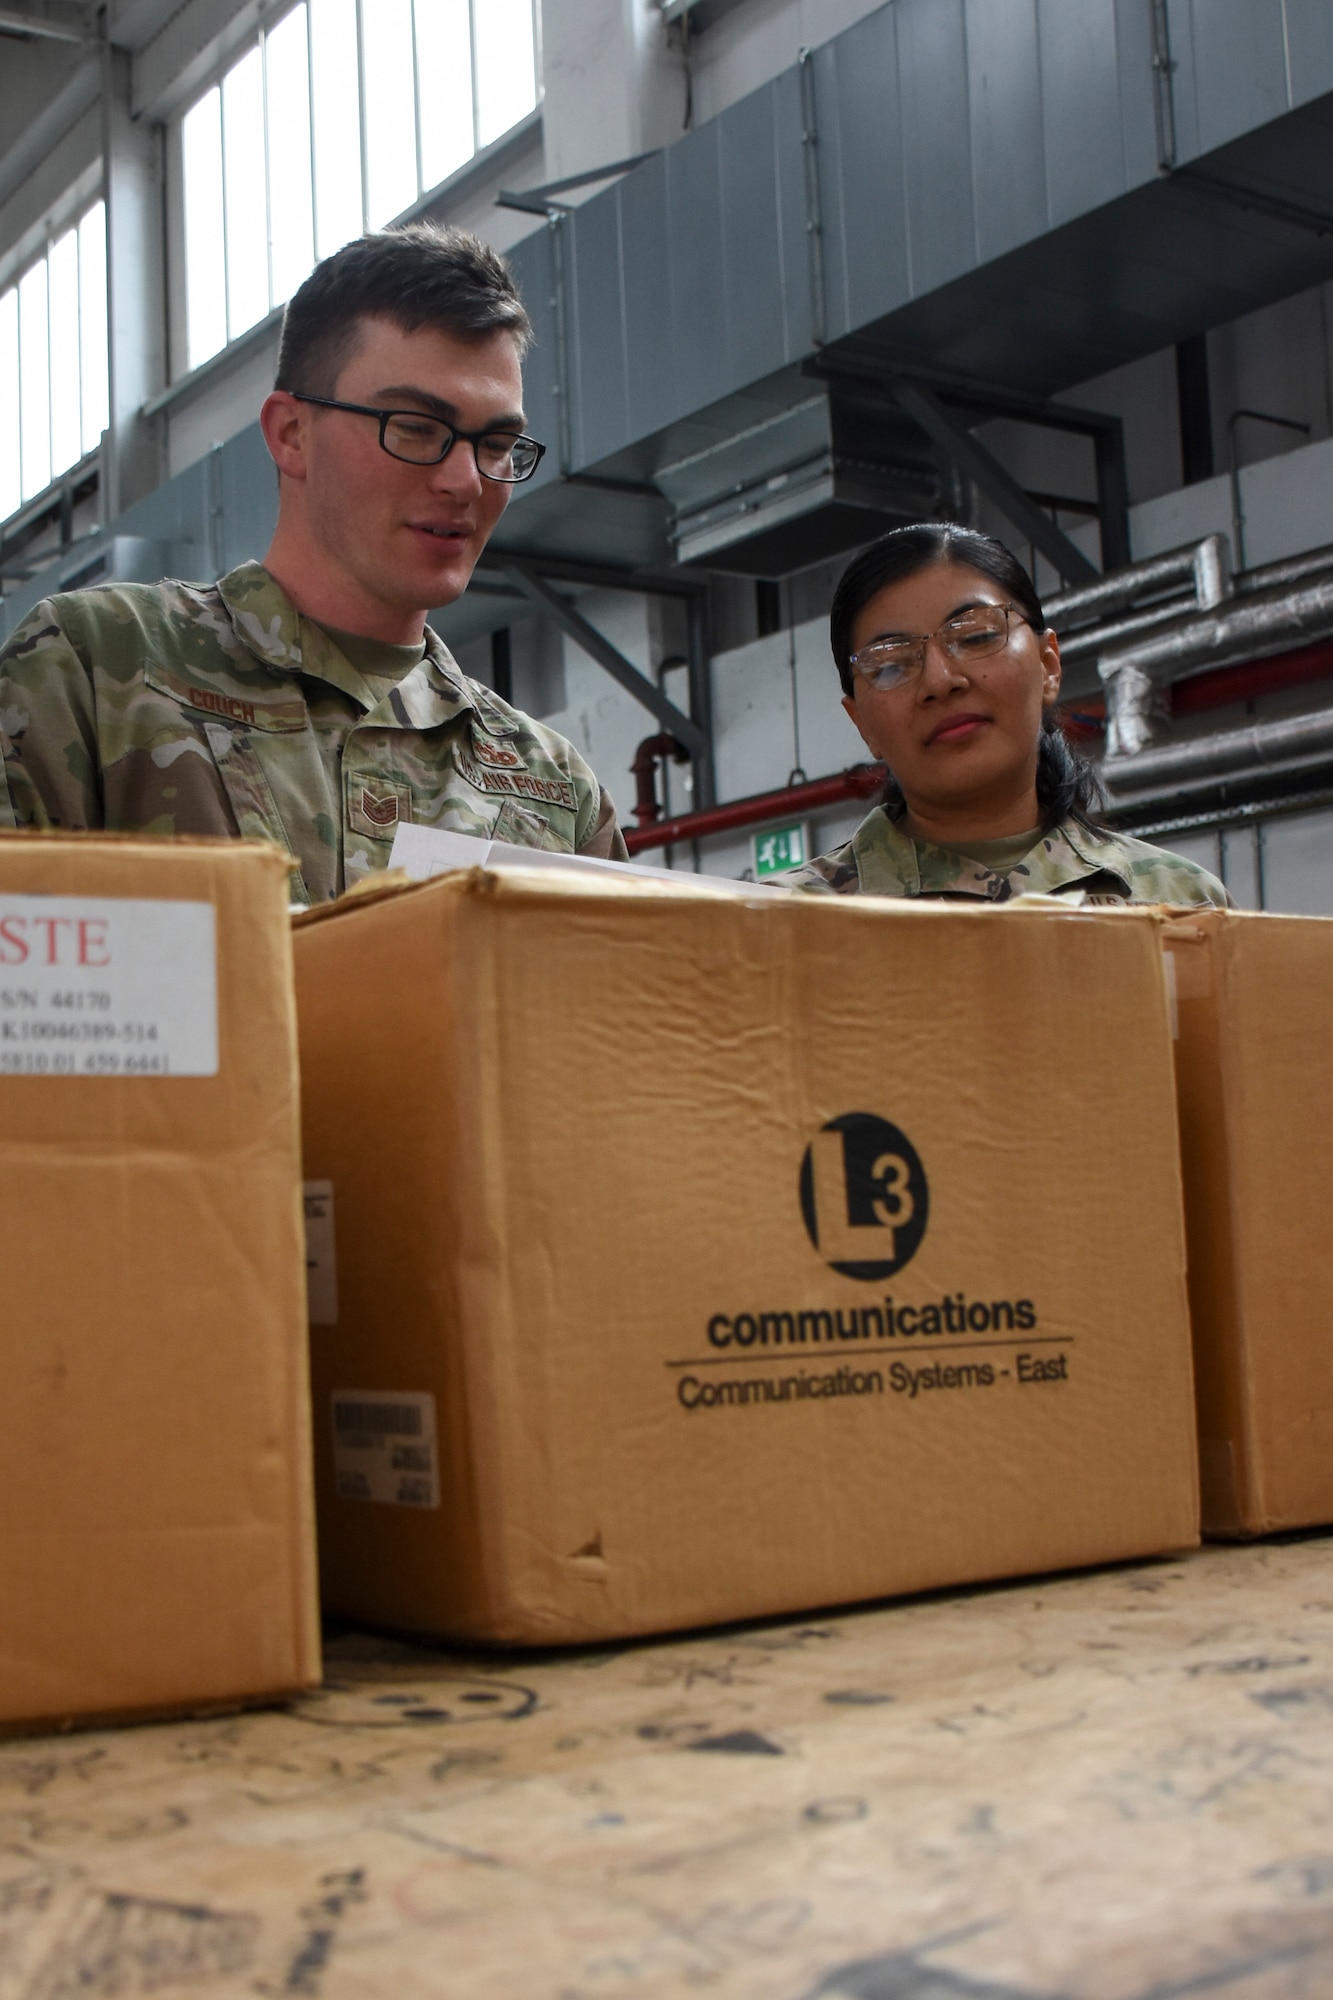 A man and a woman inspect packages on a shipping counter in a warehouse.